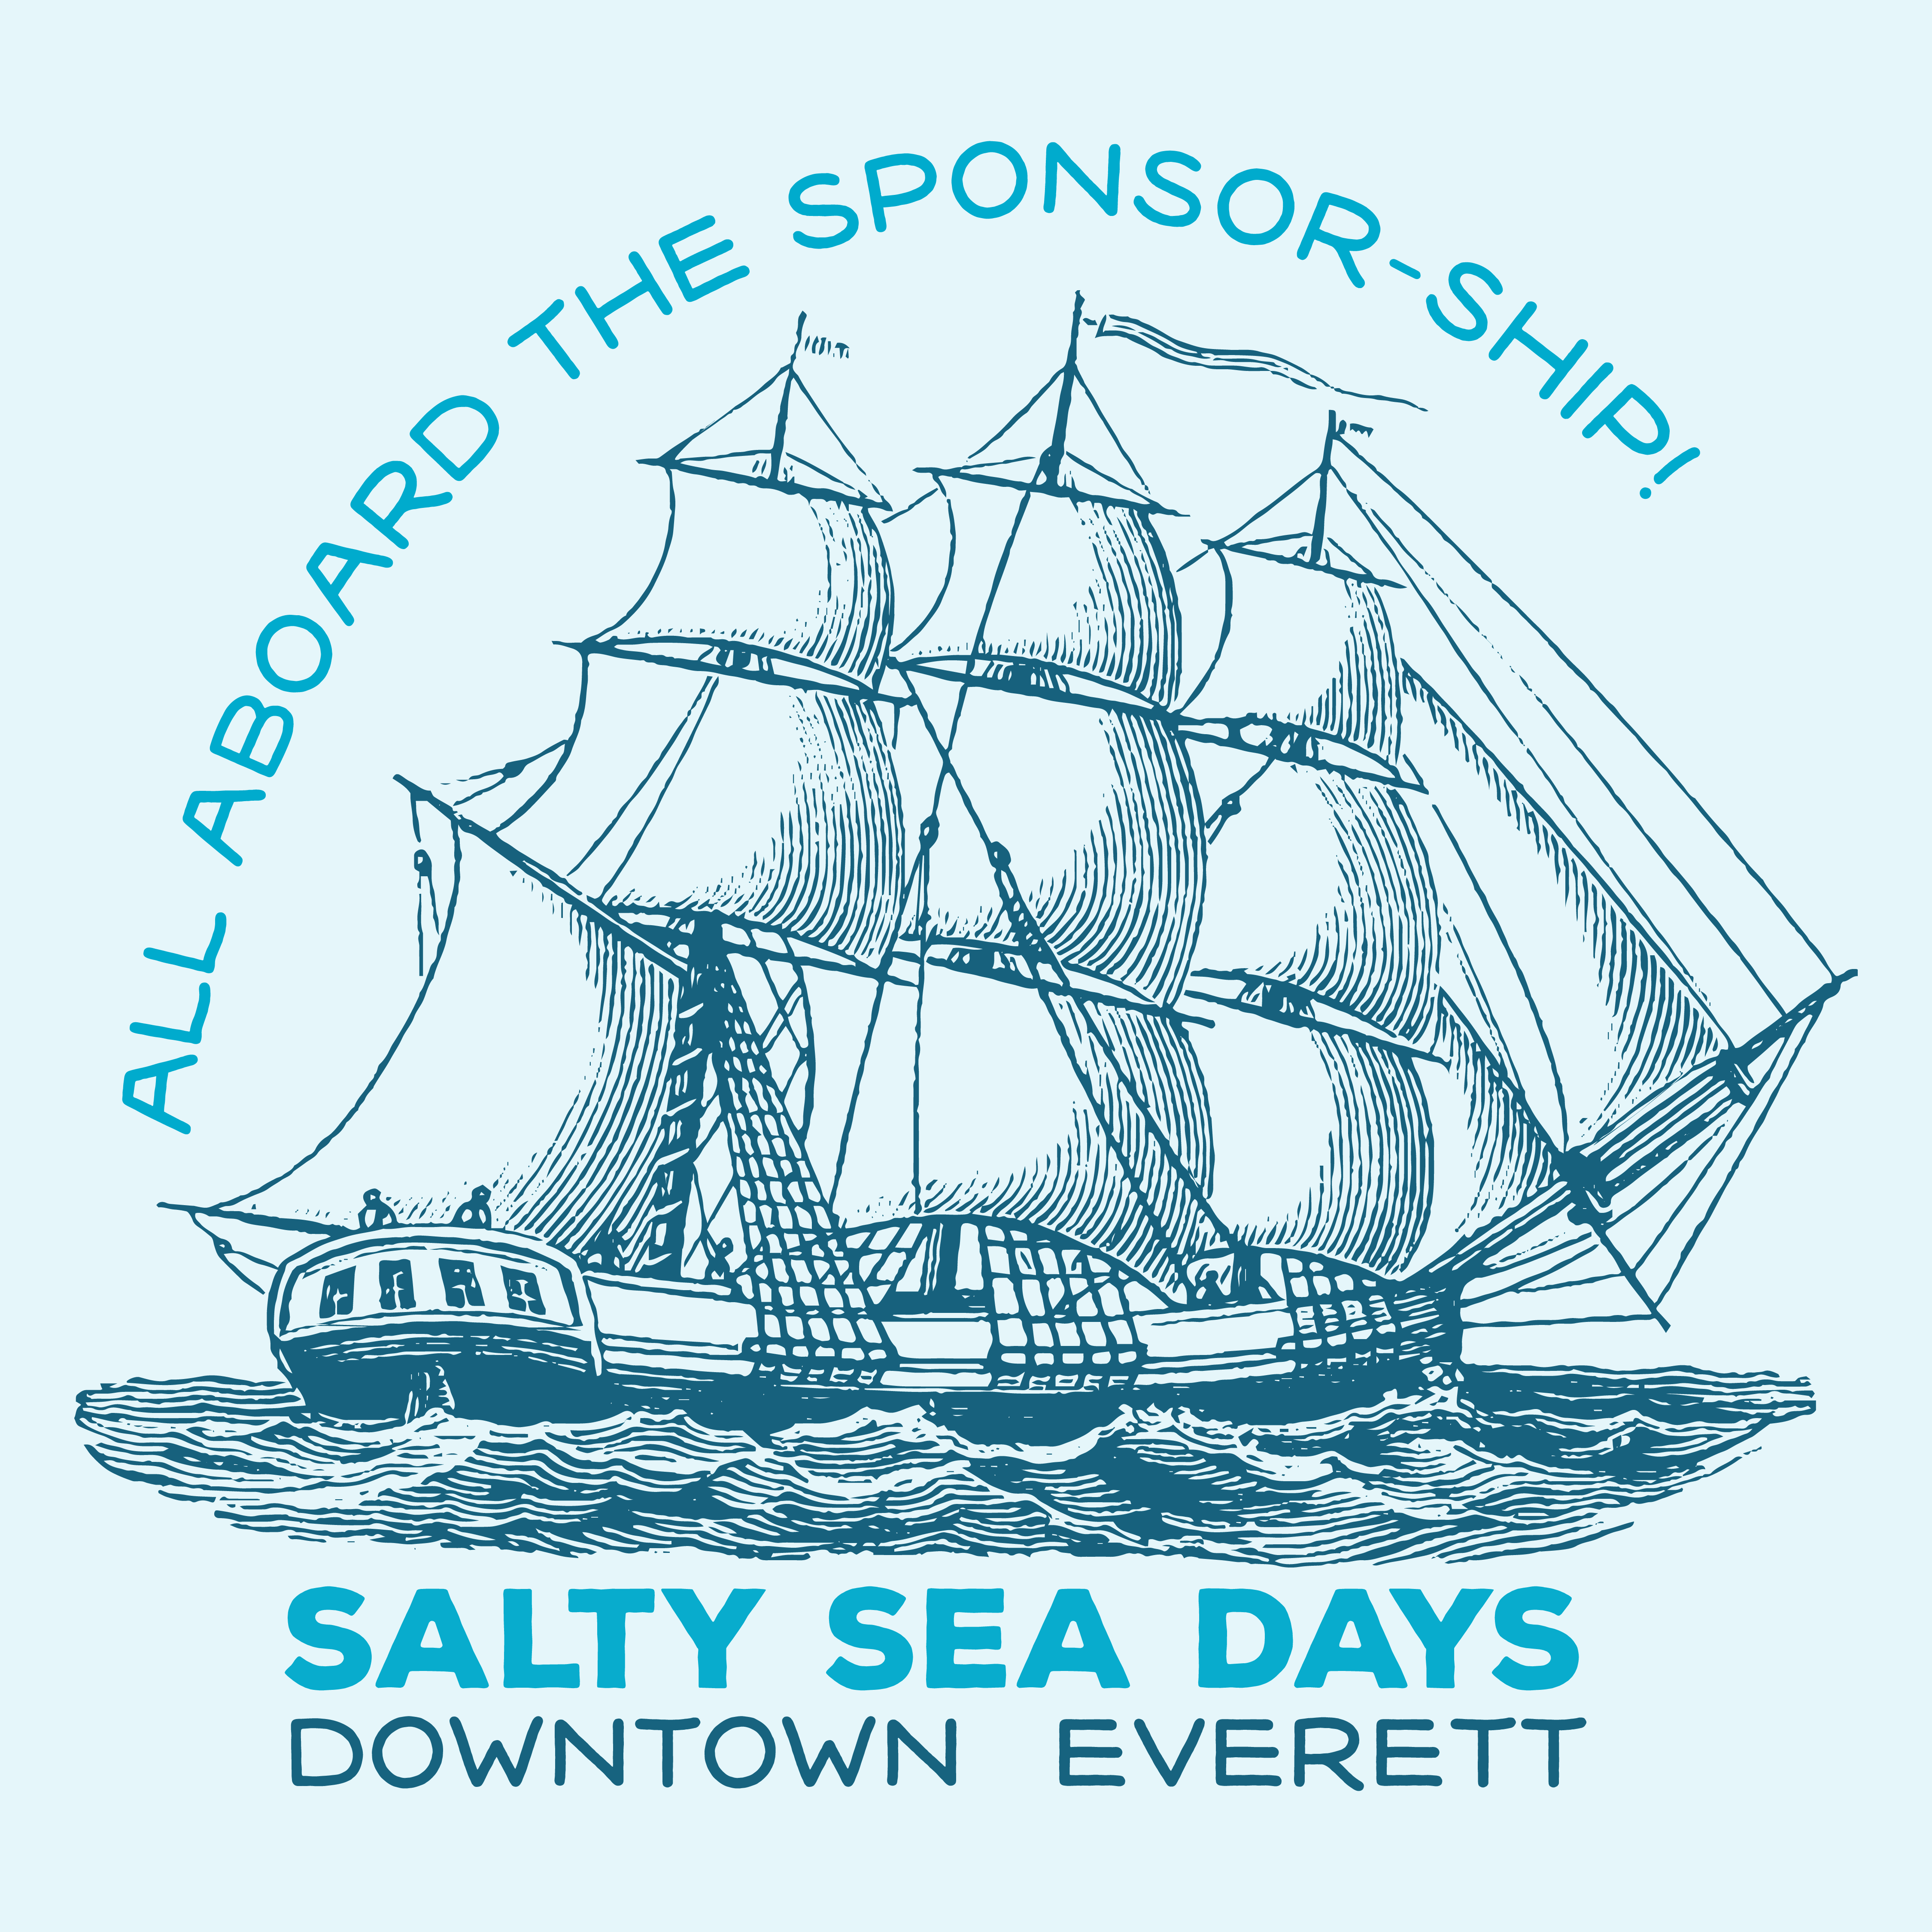 Catch the wave of success with a Salty Sea Days sponsorship!